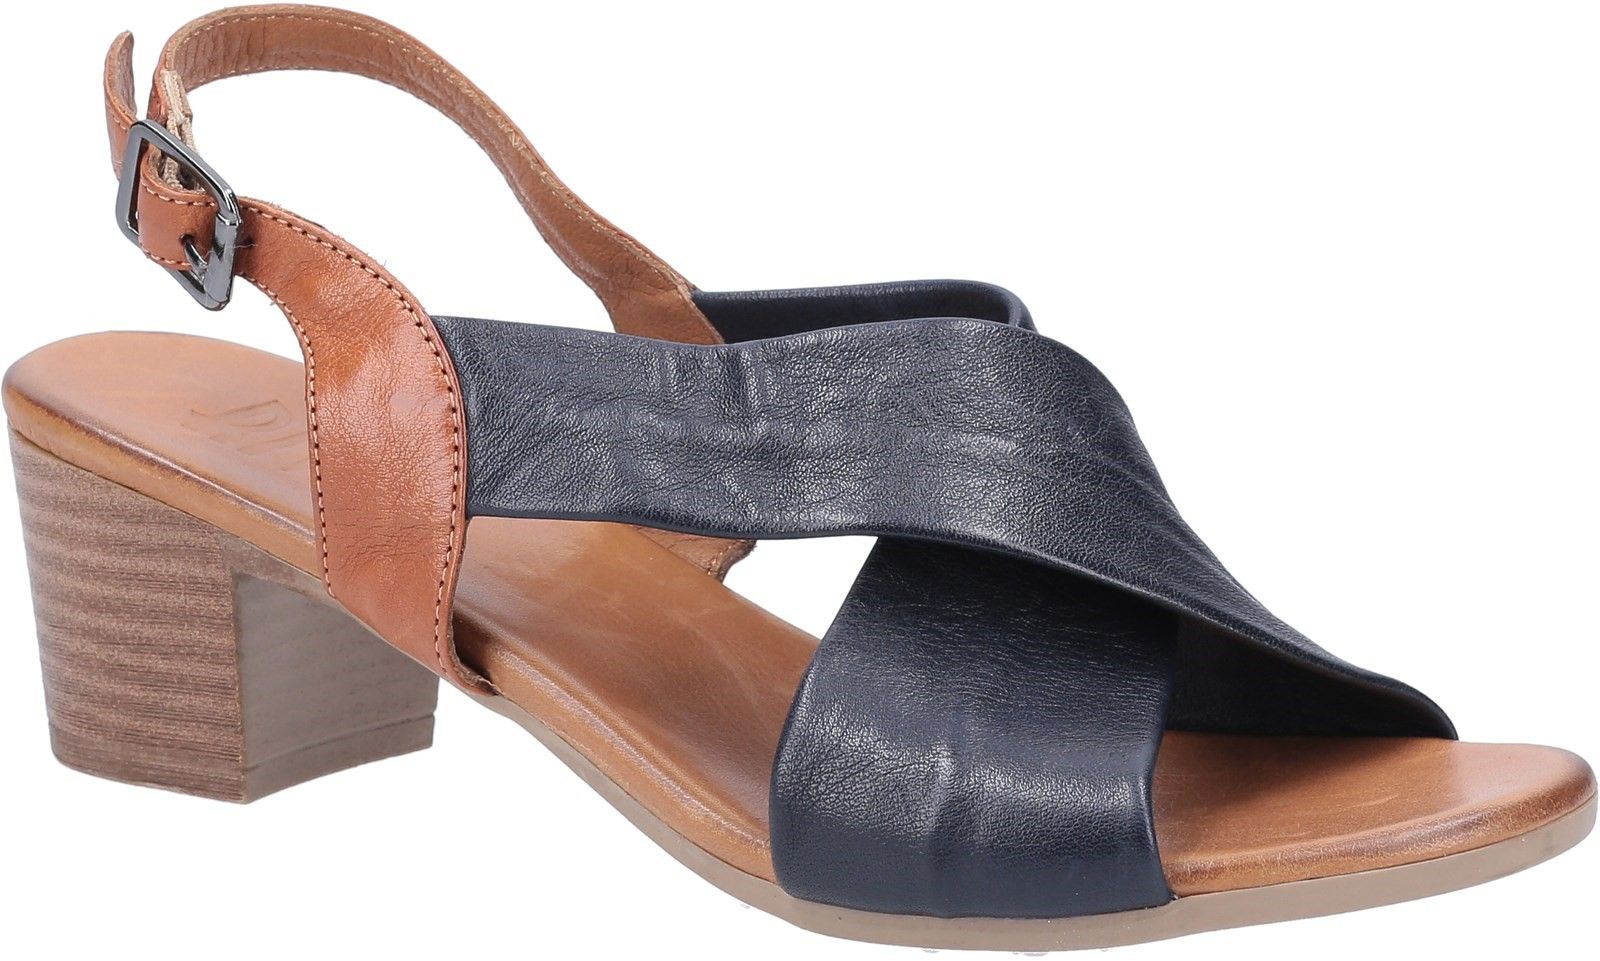 Womens Slingback Sandal from Riva, Tule takes you from day to night in chic casual style. Crafted from soft Leather and featuring a crossover design with adjustable buckle fastening for a secure fit. Slingback Sandal. 
Leather Upper. 
Buckle Adjustable Fastening. 
Block heel. 
Crossover design.